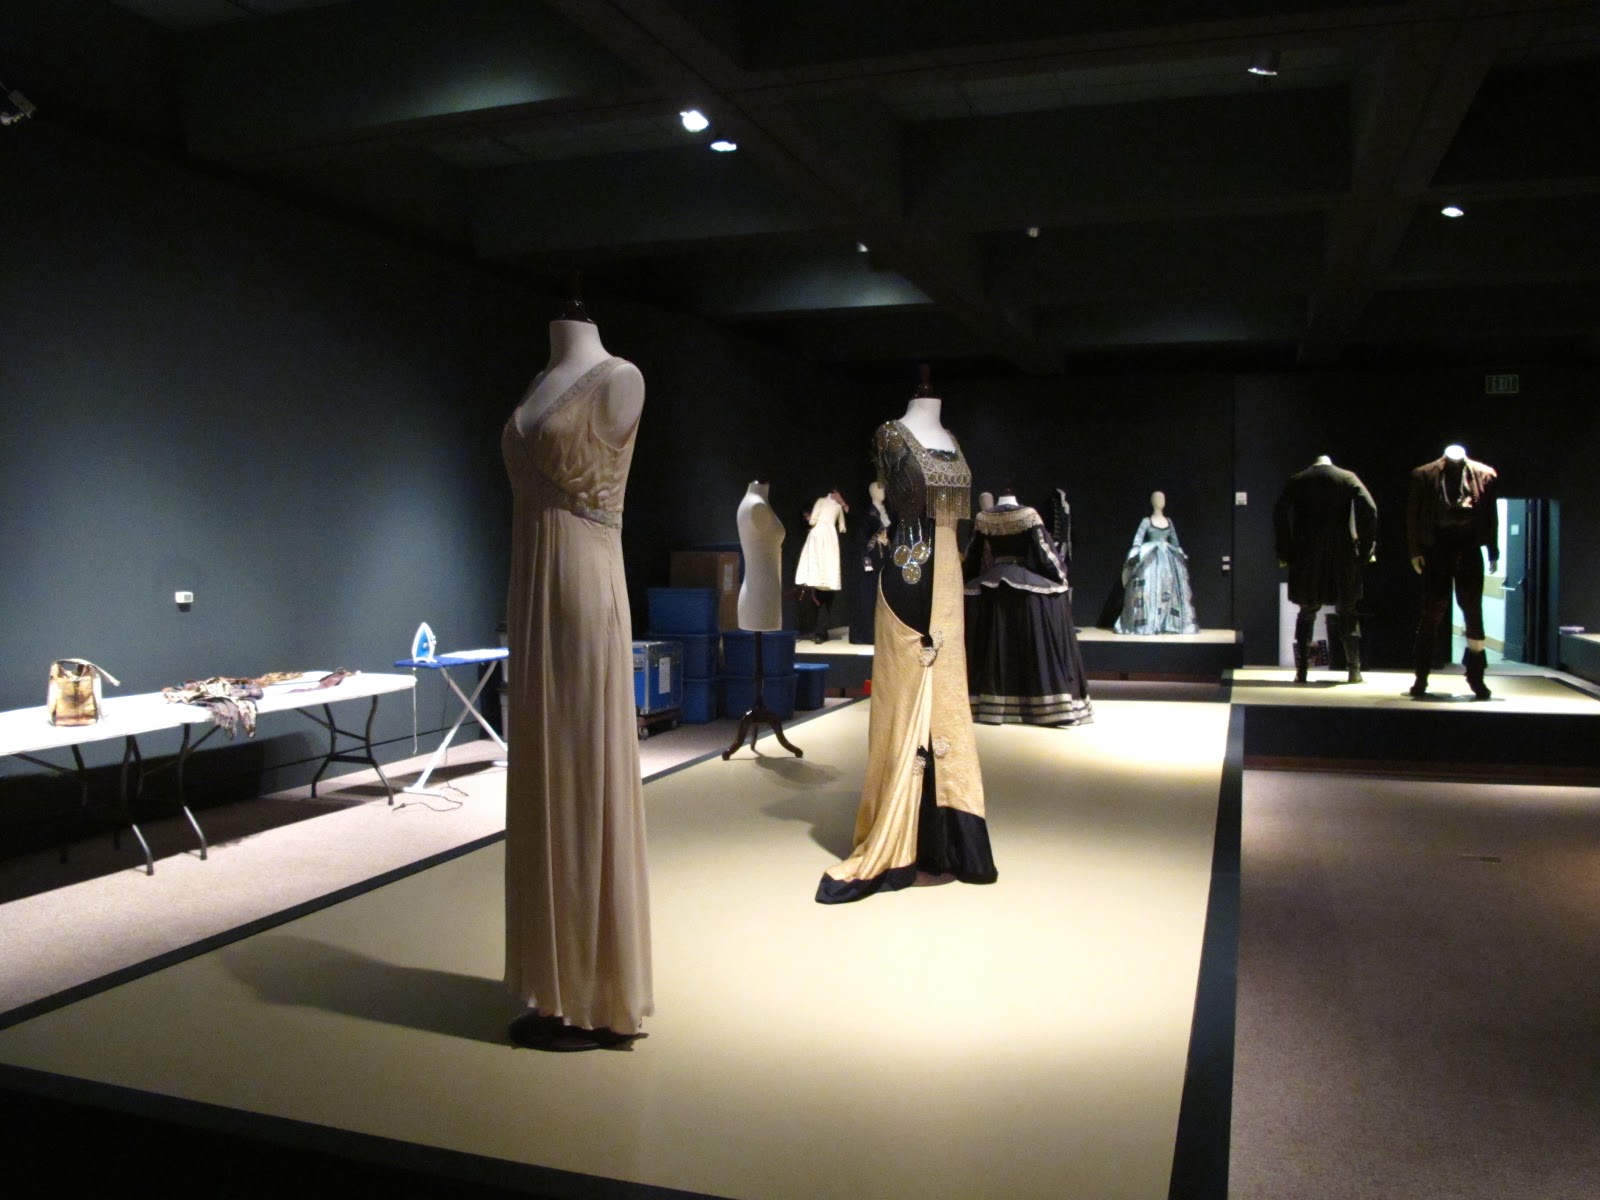 CUT! Costume and the Cinema Ready to Debut - EasyBlog - Bowers Museum